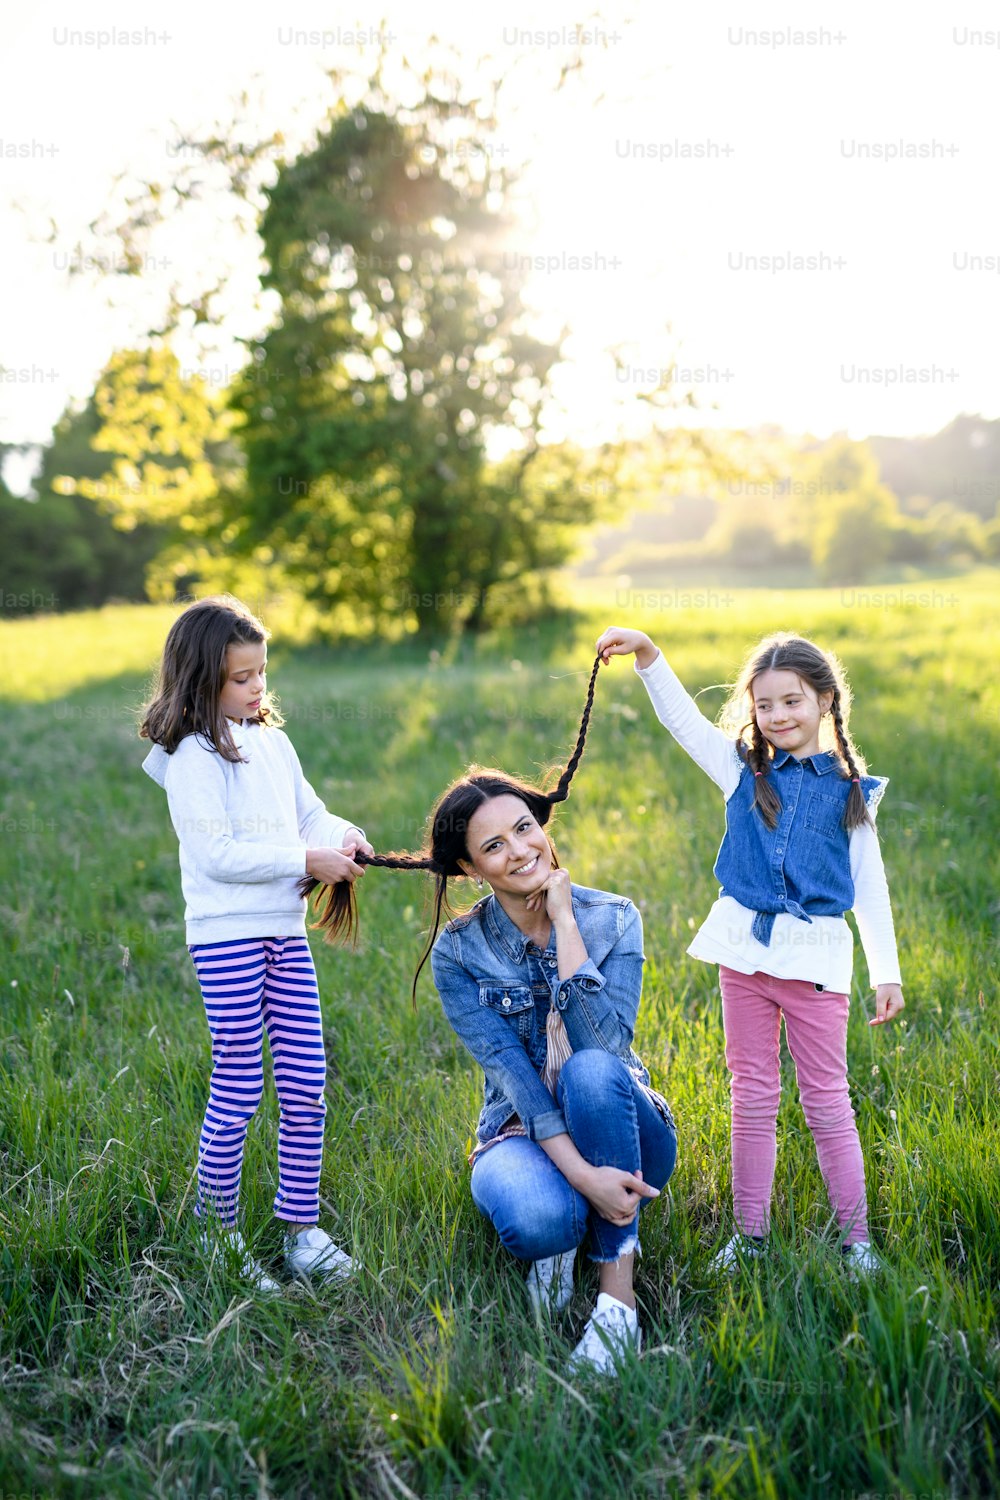 Front view of mother with two small daughters having fun outdoors in spring nature, playing with hair.